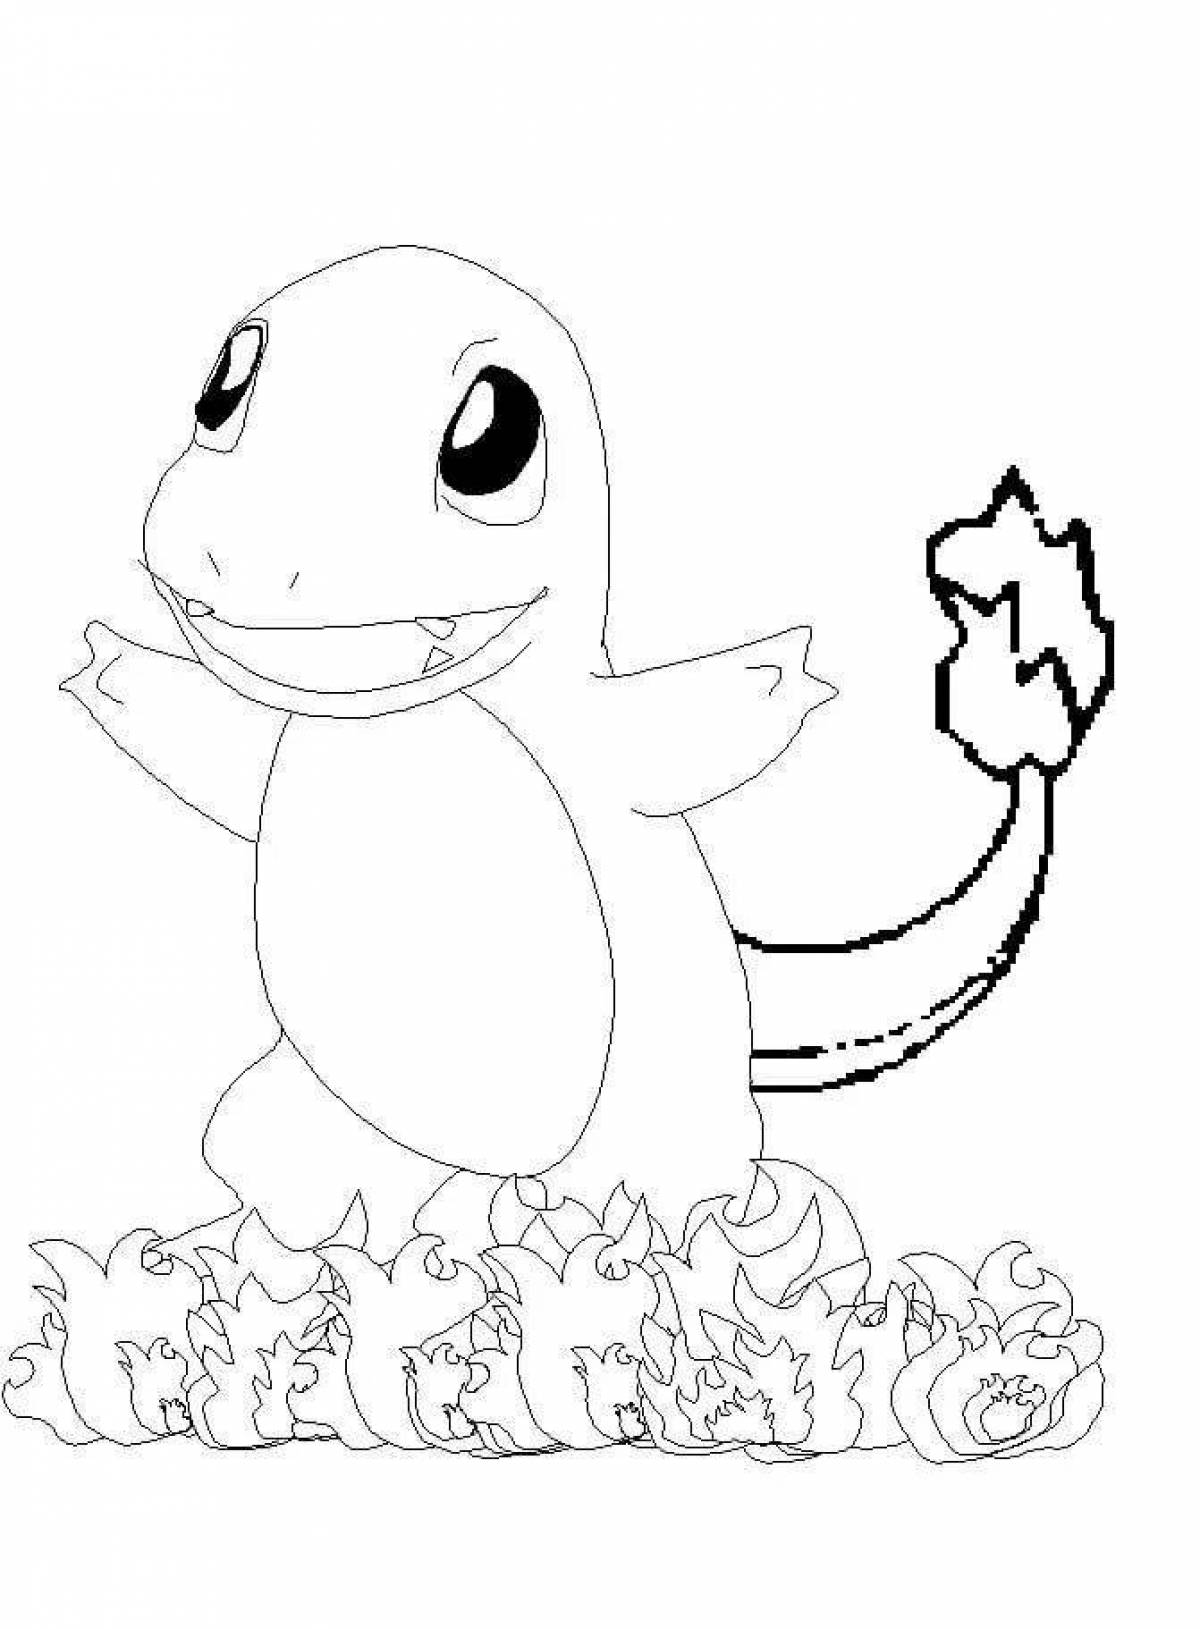 Cool charmander coloring page